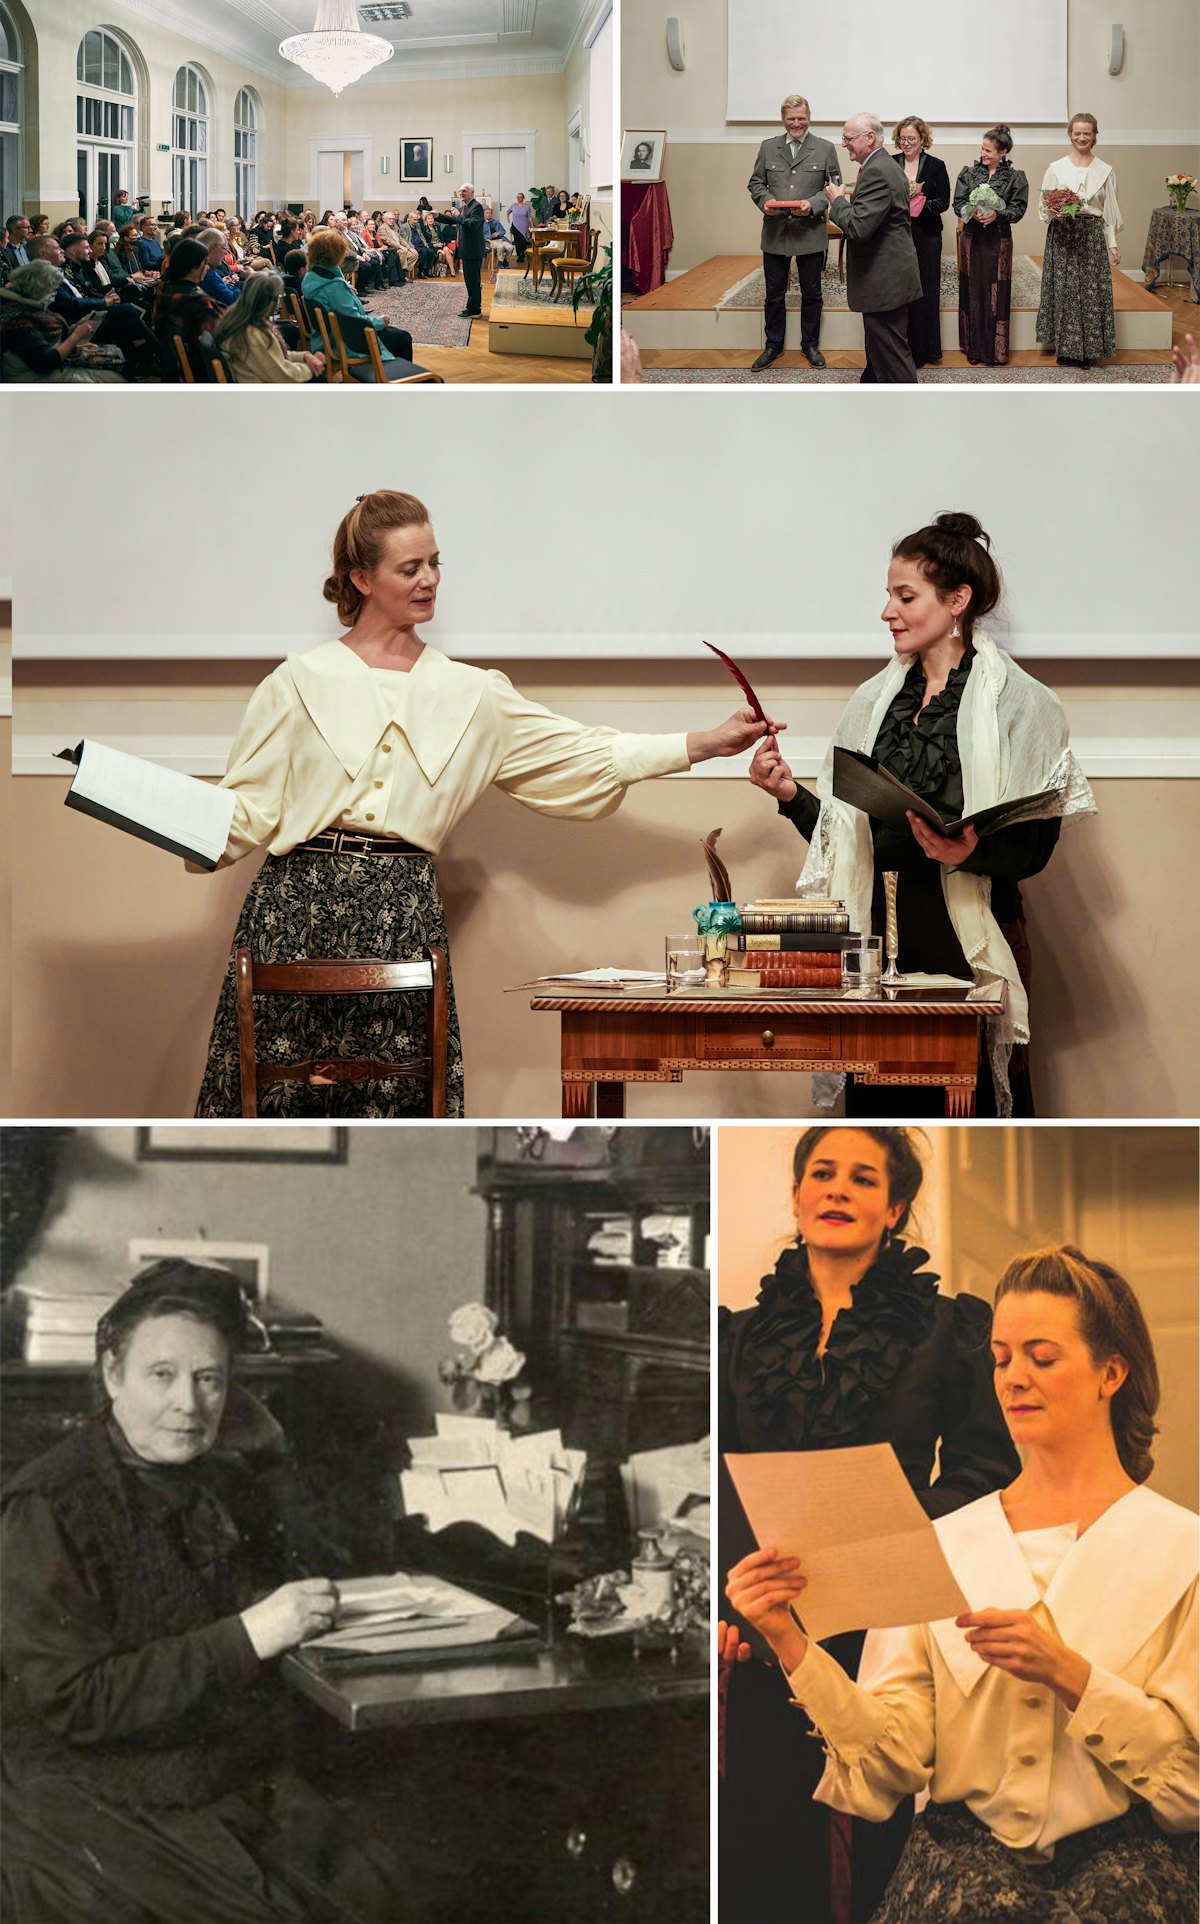 A play staged by the Bahá’ís of Austria explored the connection between Táhirih, a Bahá’í heroine, and Marianne Hainisch, founder of Austria’s women’s movement, as part of their efforts to contribute to the discourse on the equality of women and men.